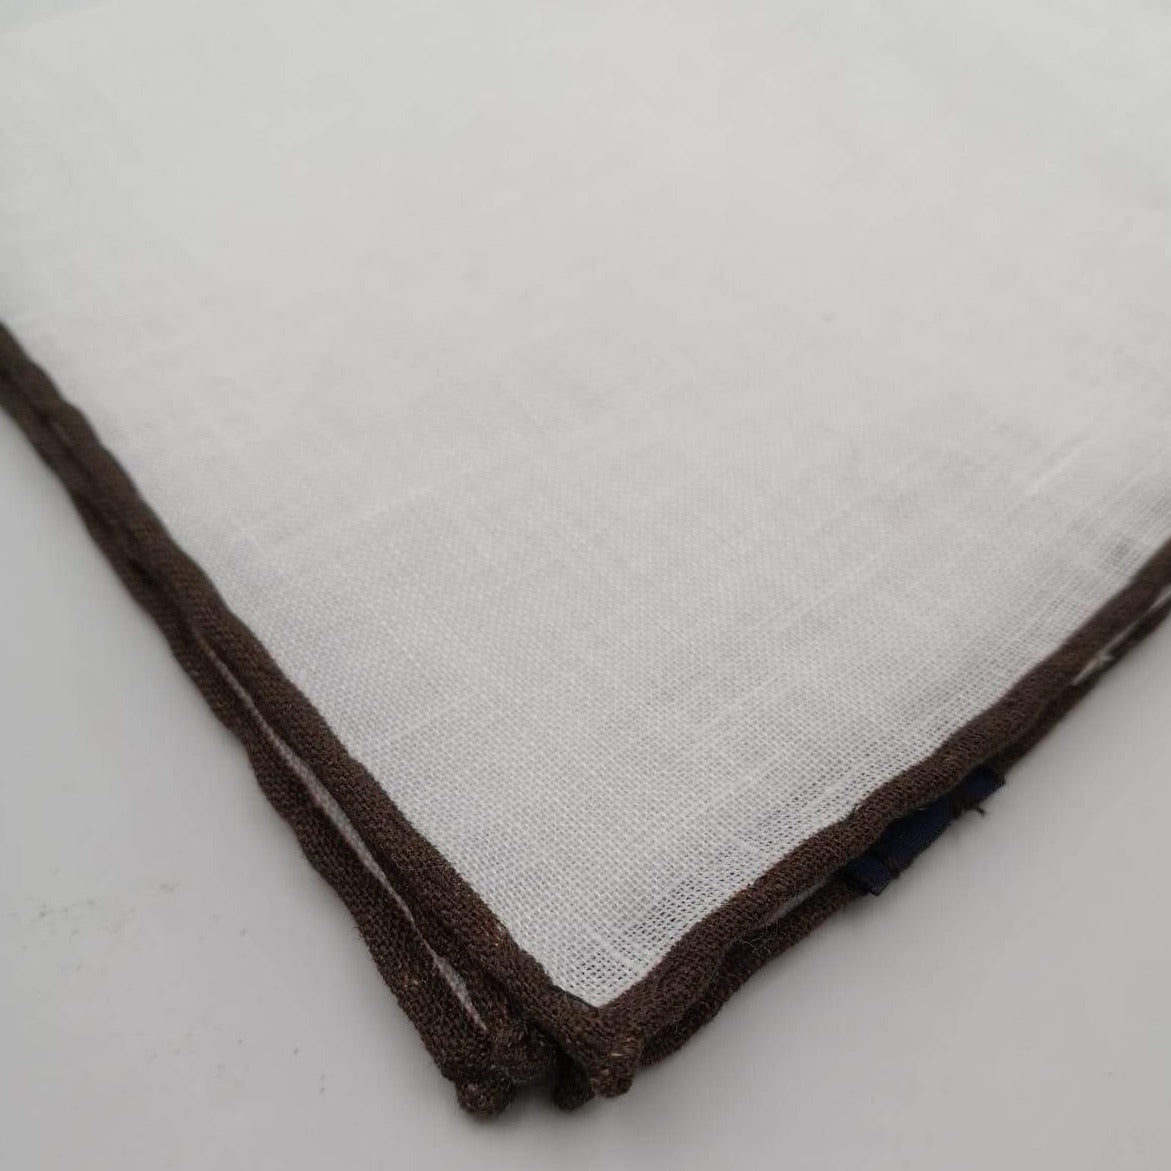 Cruciani & Bella 100% Linen Hand-rolled  -  Pocket Square White and Brown Handmade in Italy 31 cm X 31cm #2134